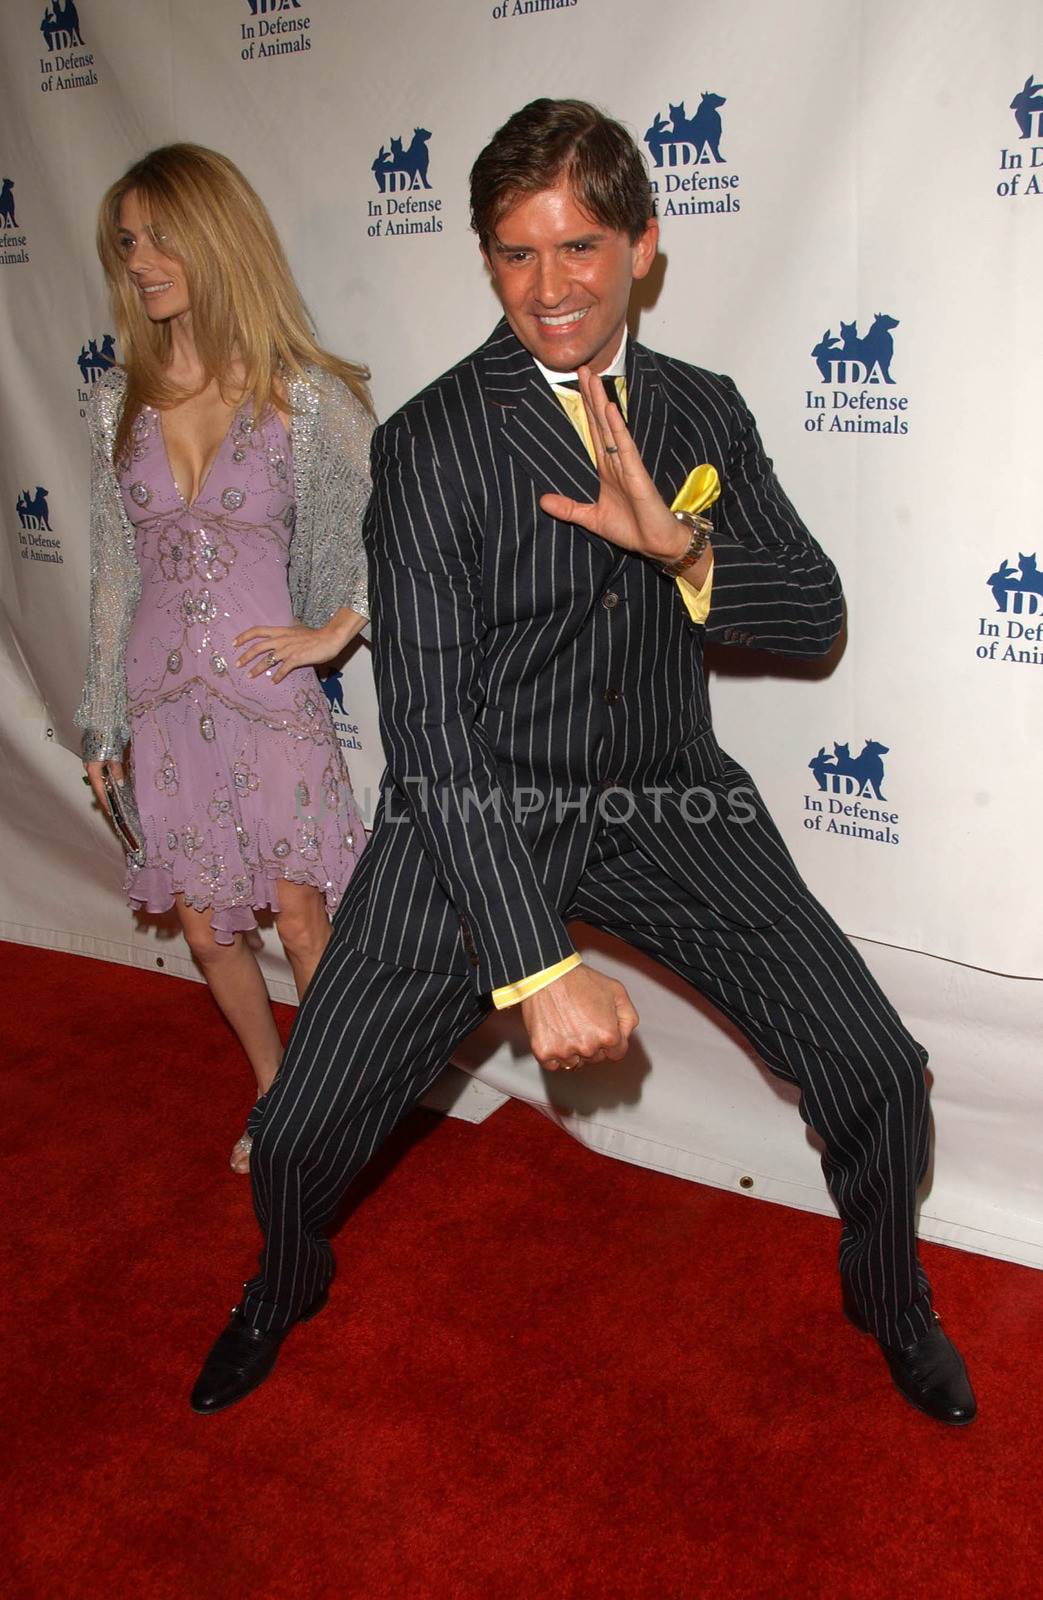 Dr. Robert Rey
at the In Defense of Animals Benefit Concert. Paramount Theater, Hollywood, CA. 02-17-07